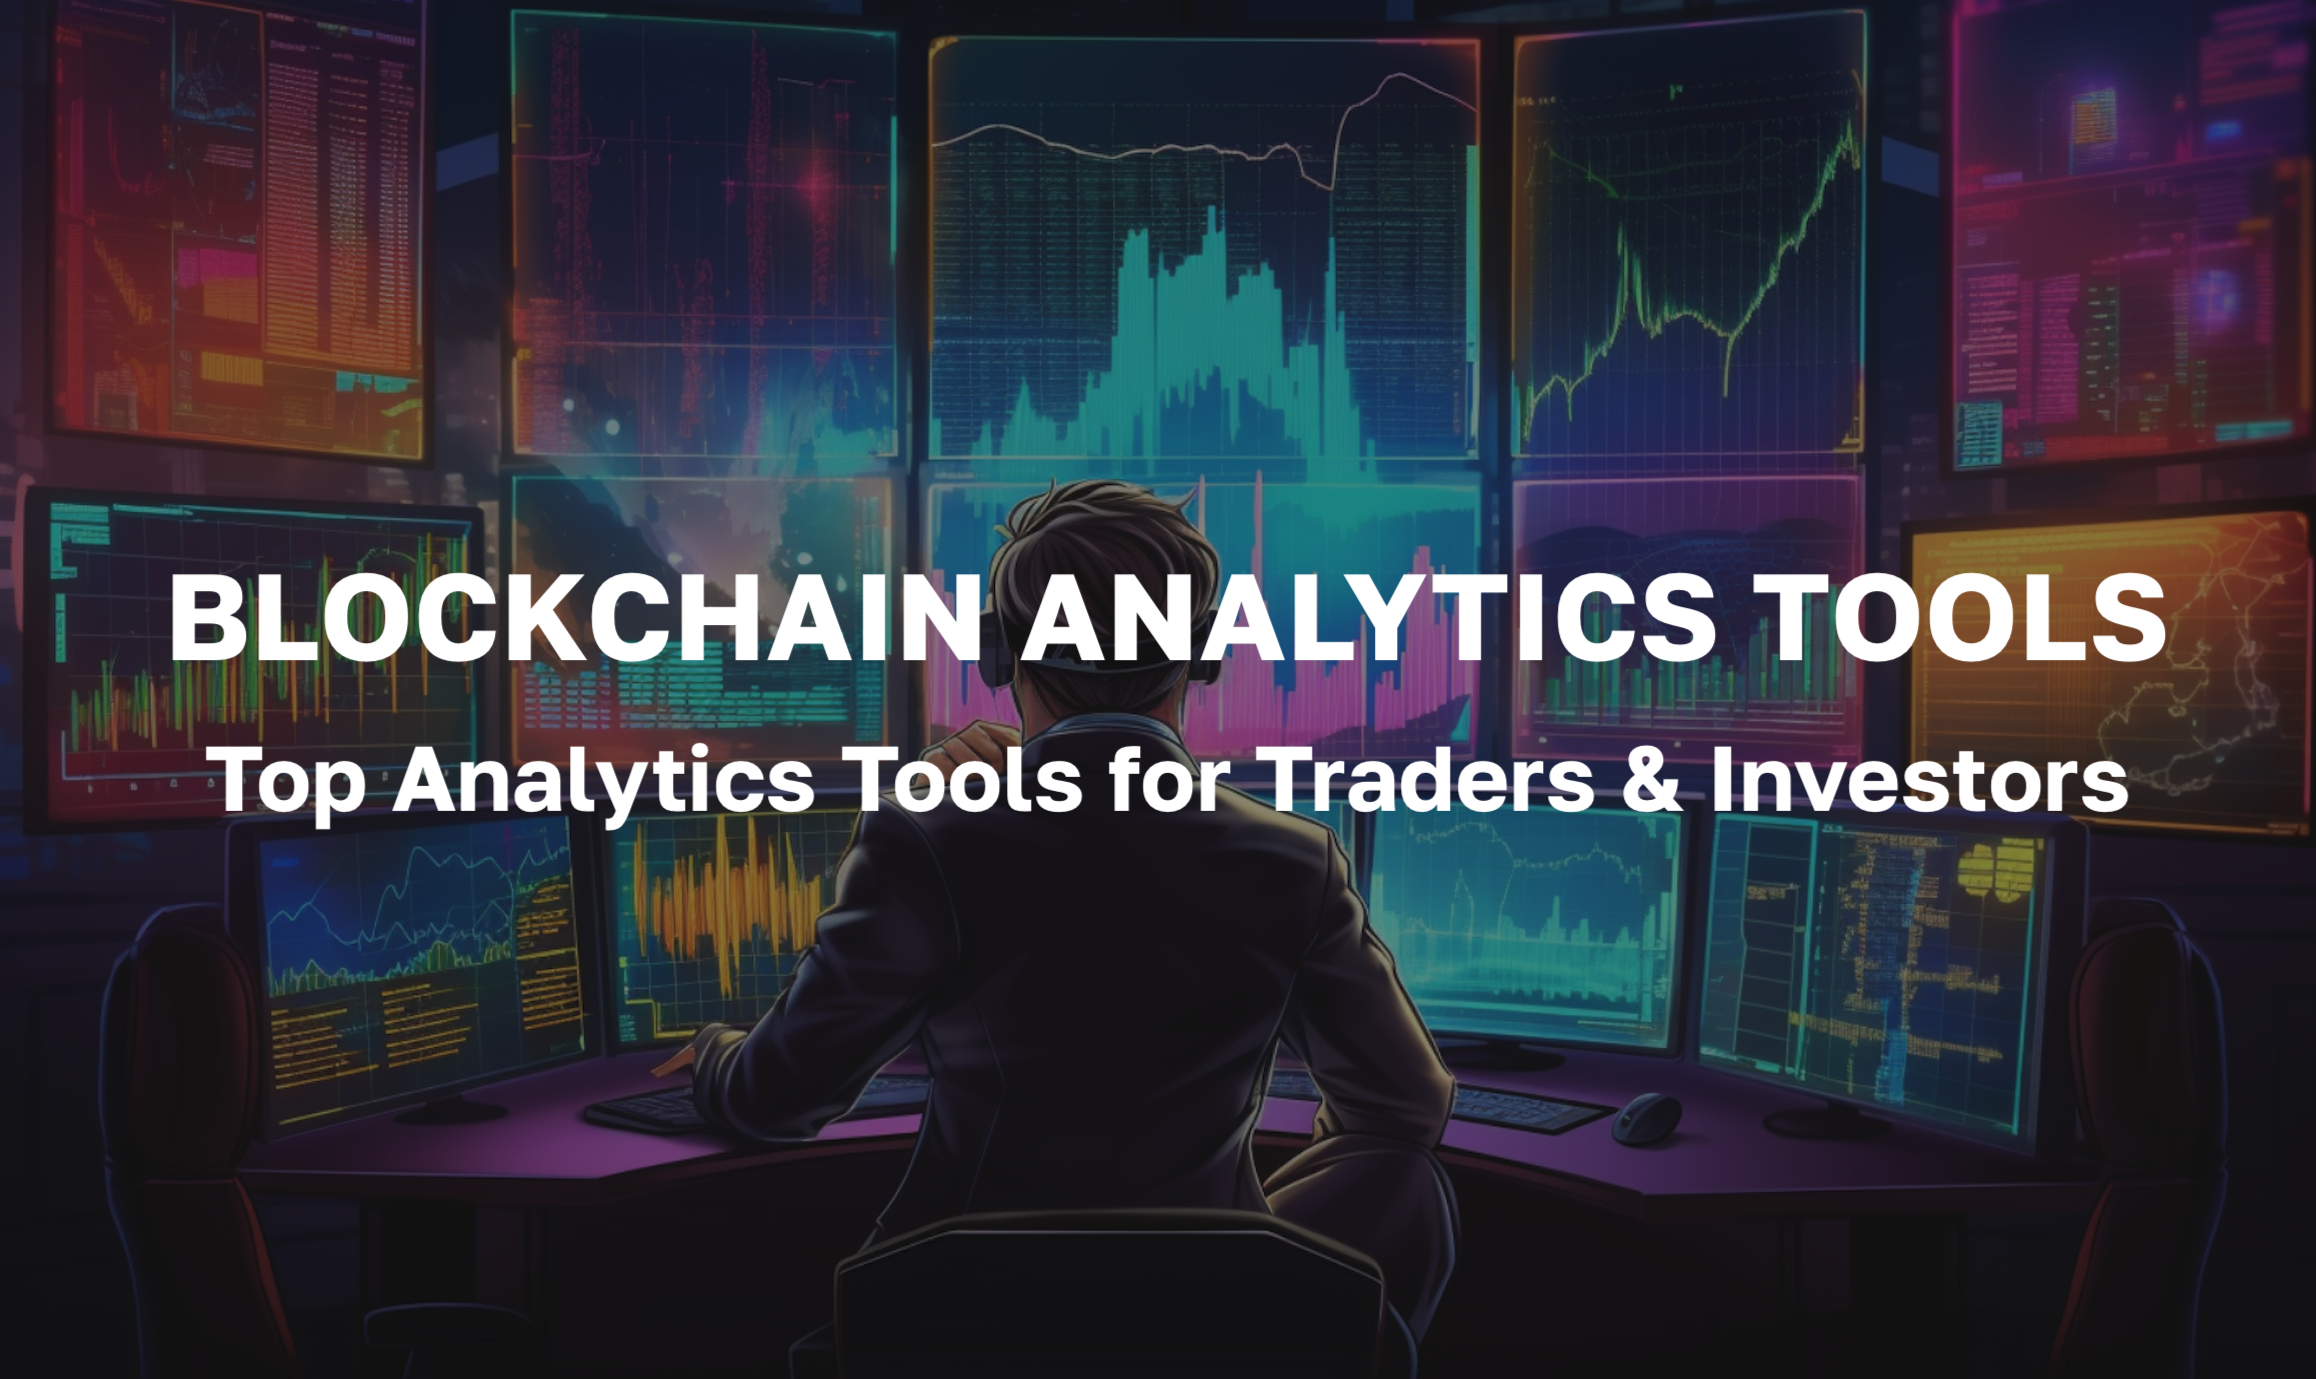 Top Blockchain Analytics Tools for Traders and Investors